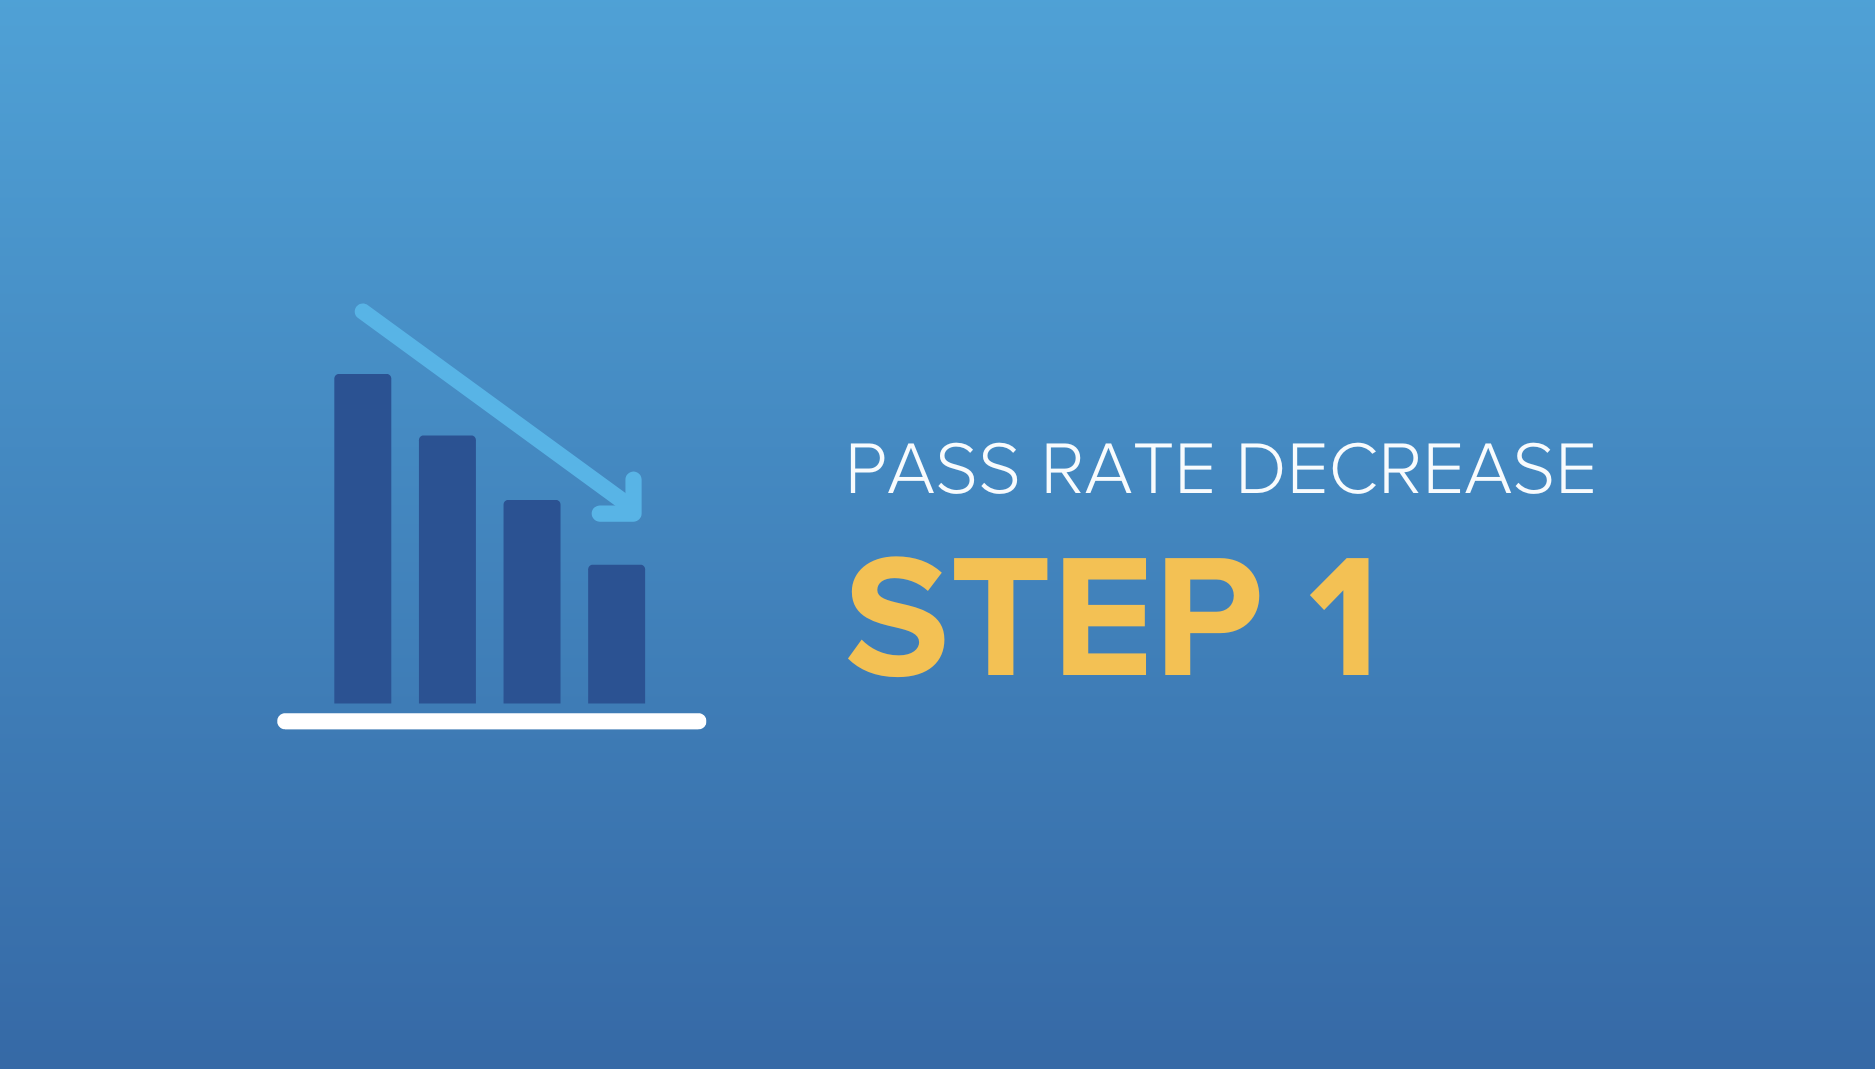 Here’s the latest on the Step 1 pass rate, plus some tips on how to prepare for the exam.